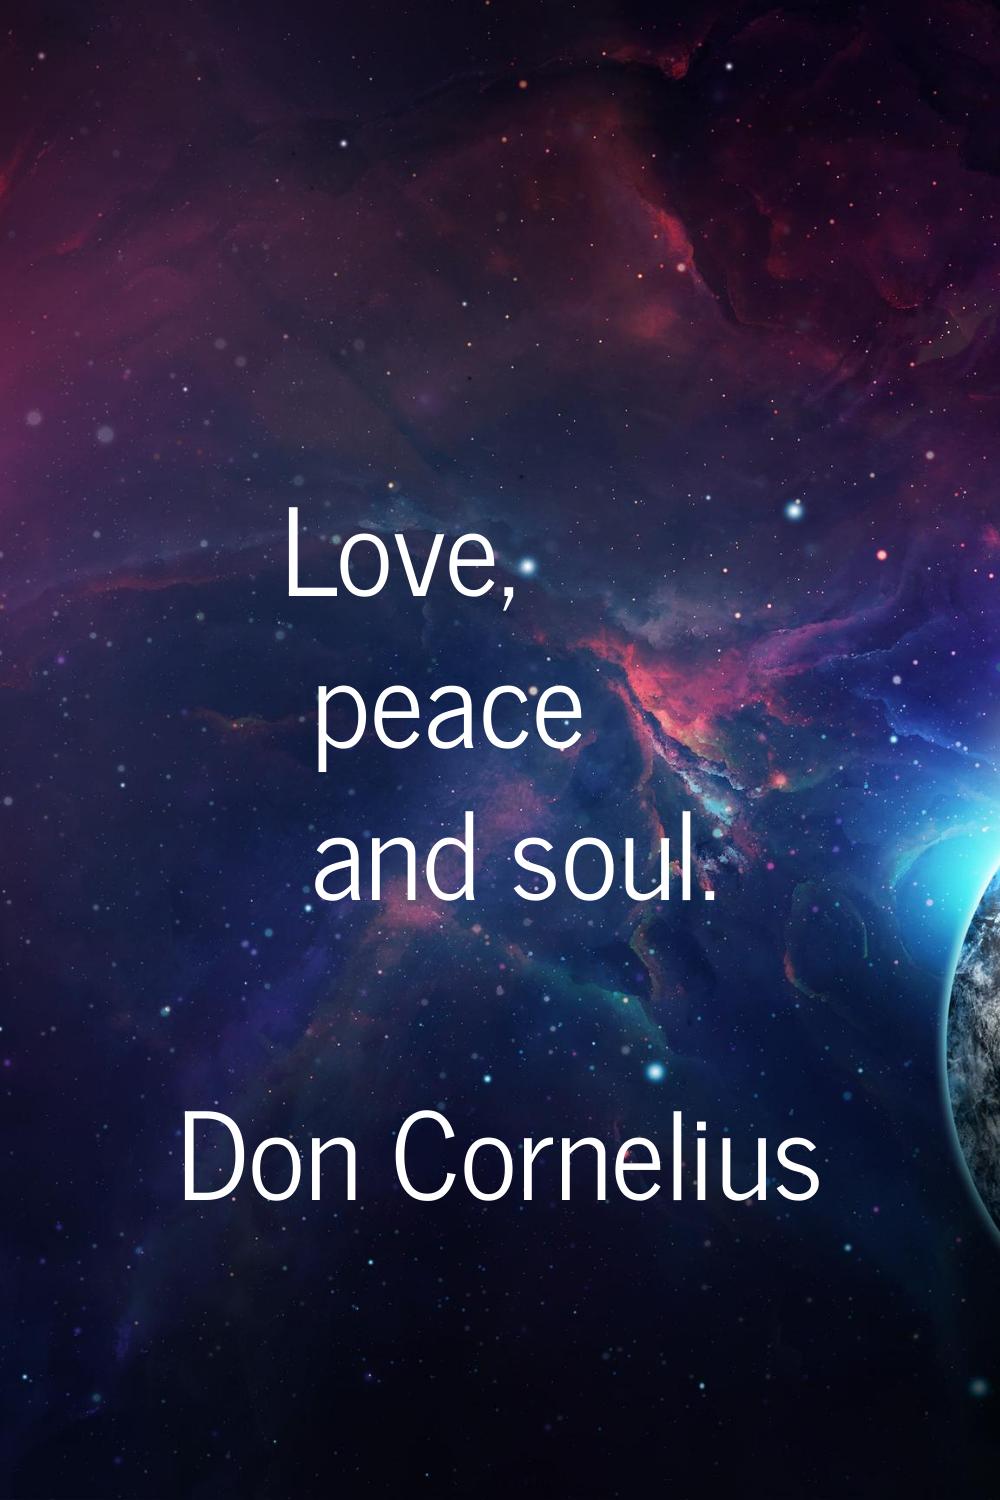 Love, peace and soul.